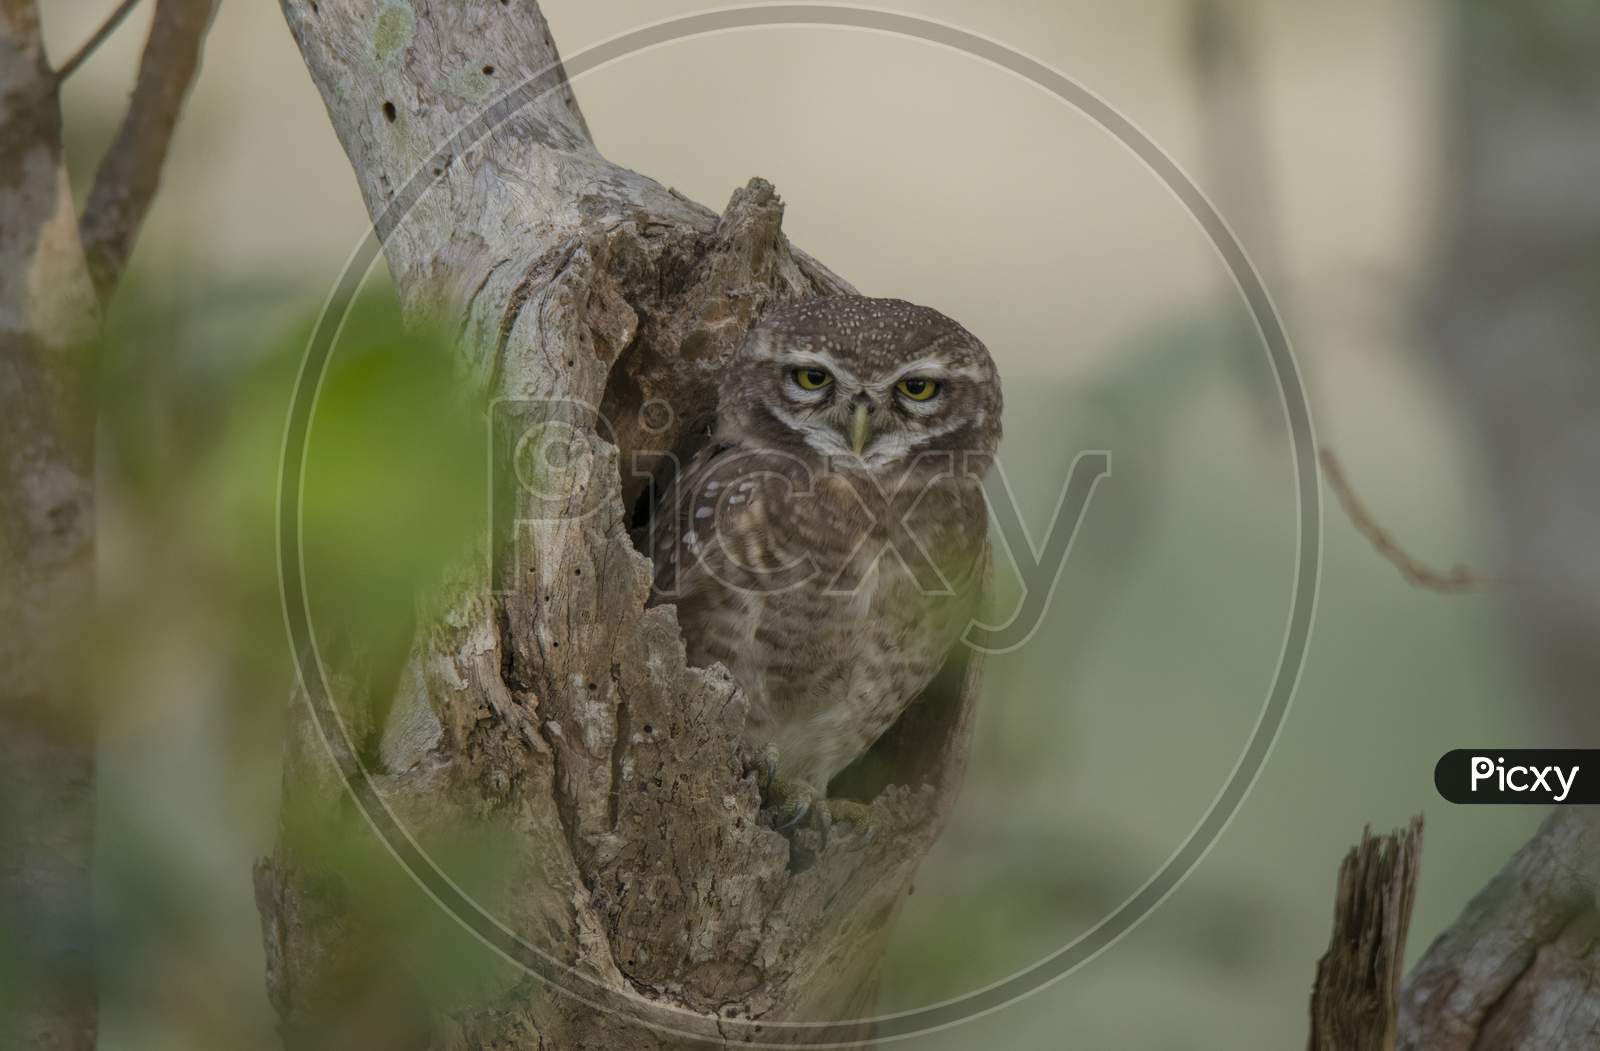 Wild Owl In The Nest At Jungle .